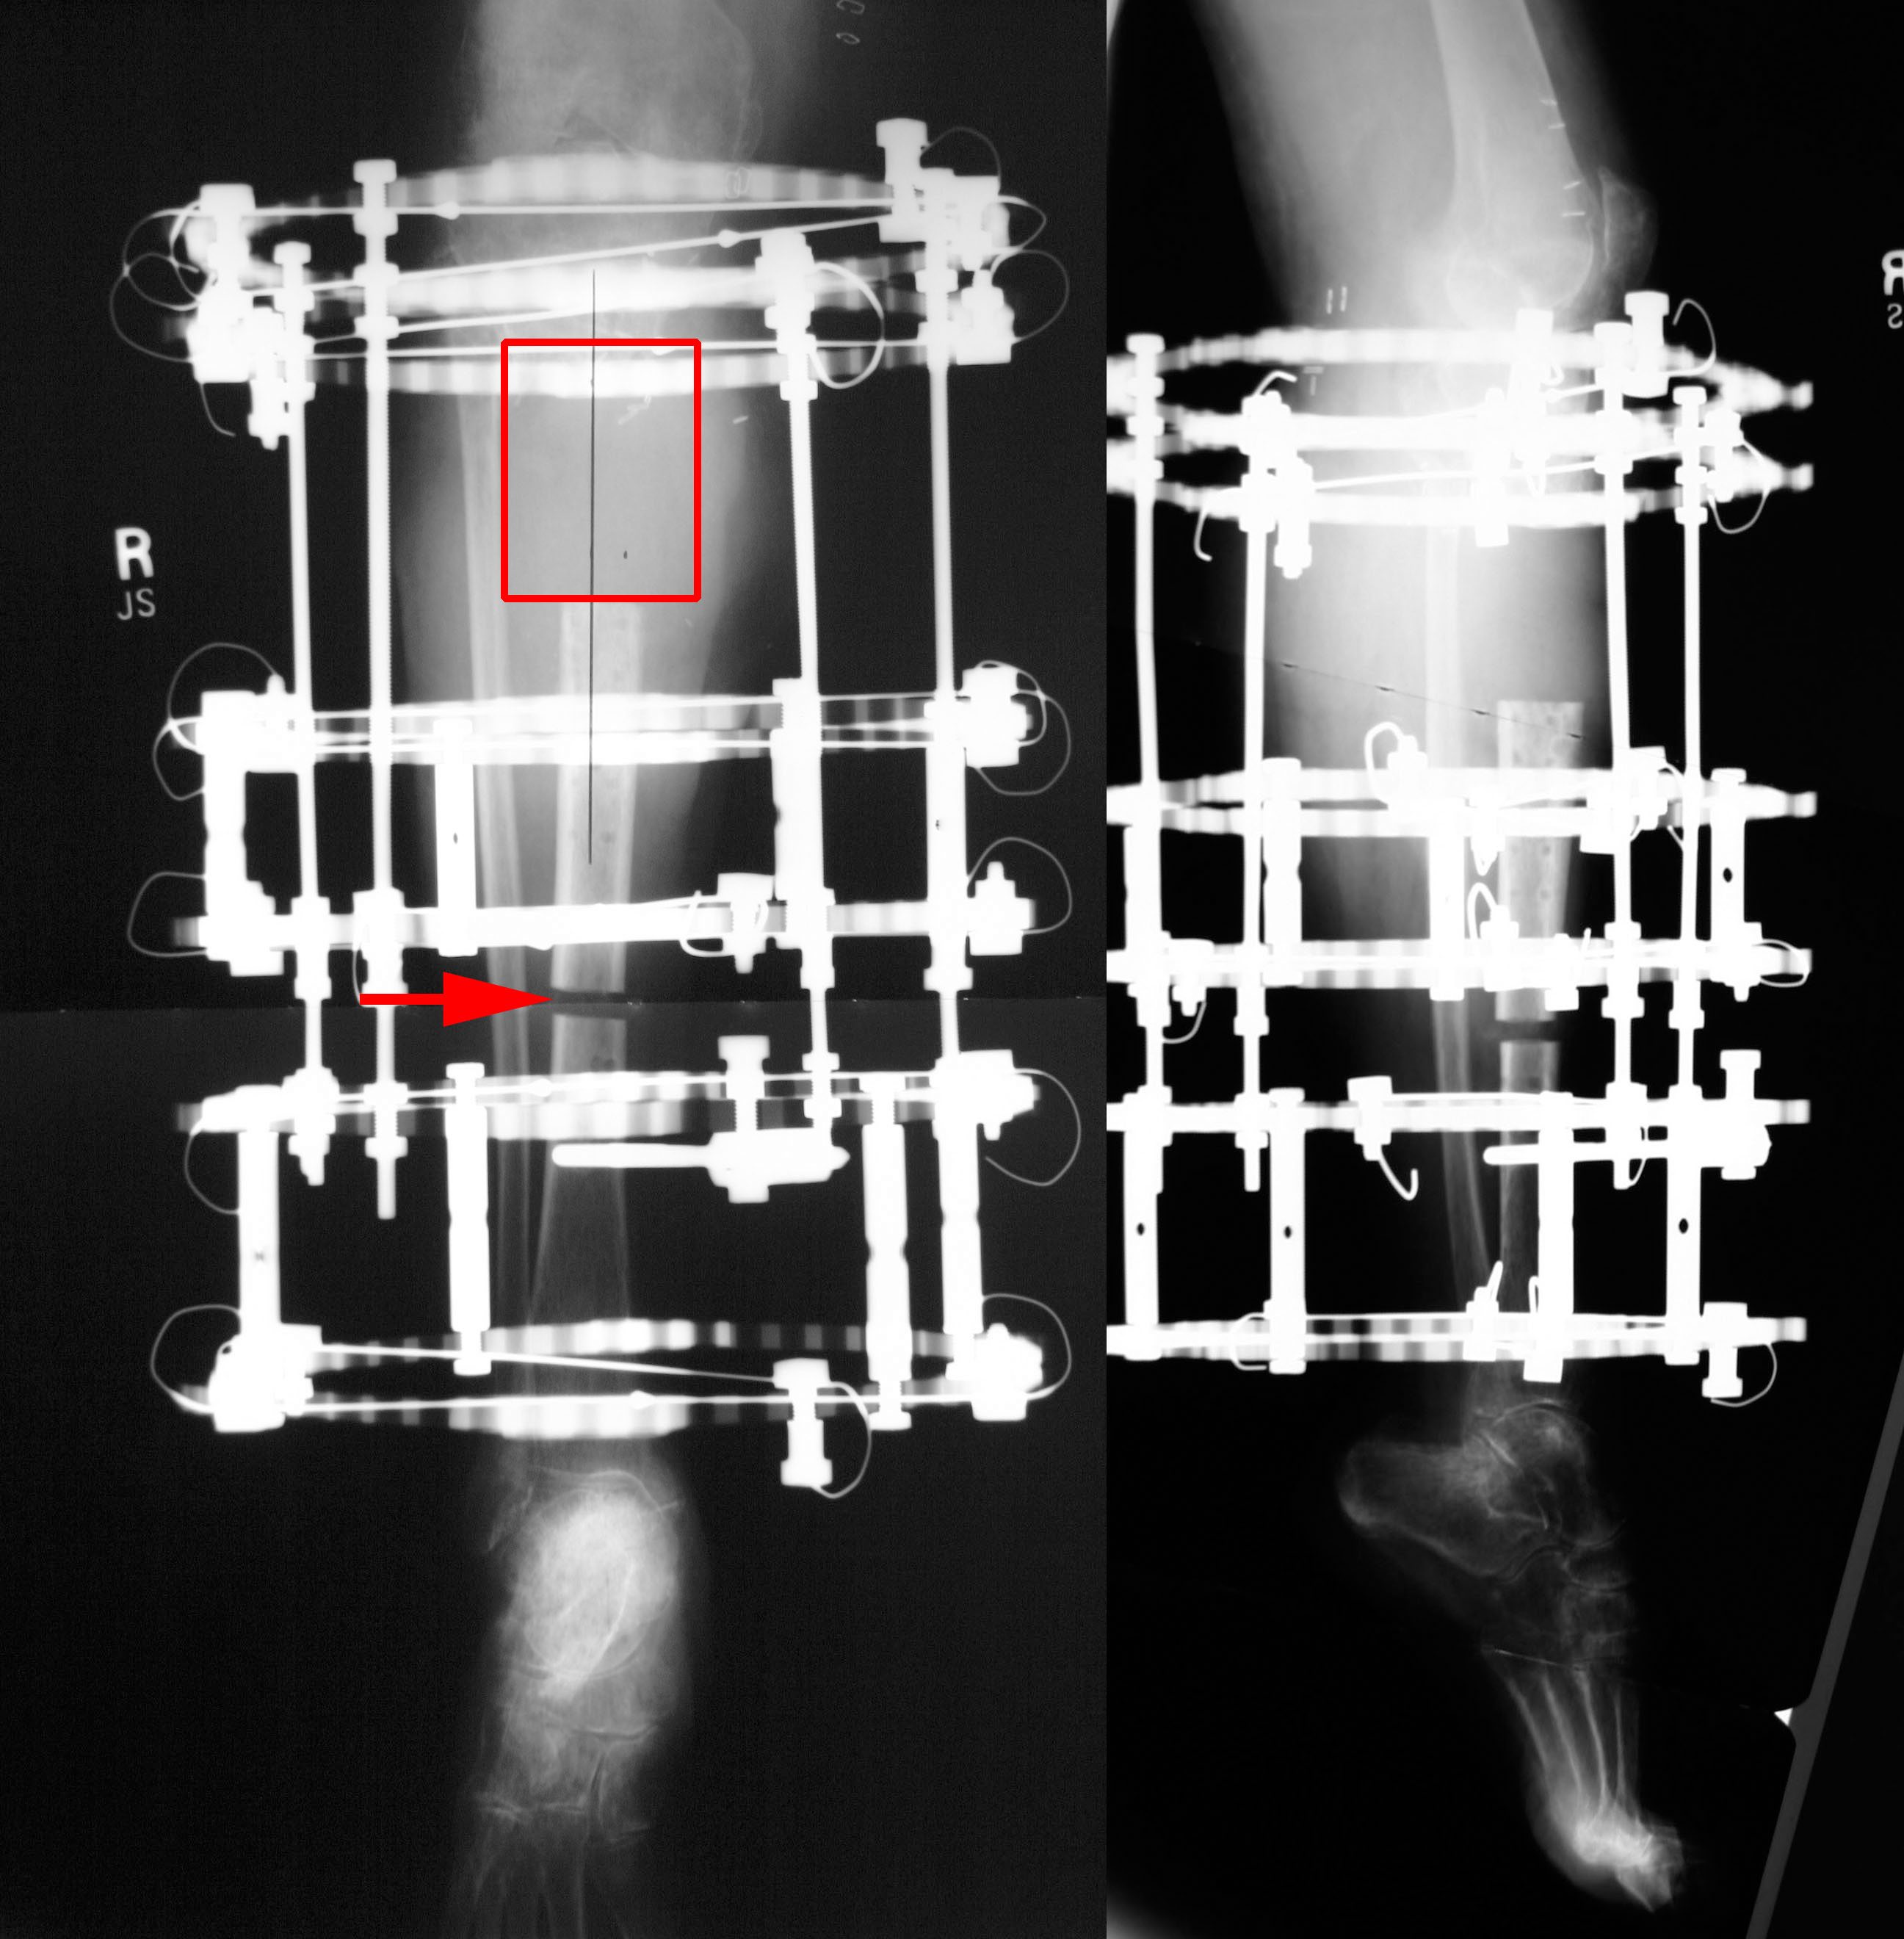 Double-level, proximal-to-distal bone transport using wire fixation. A